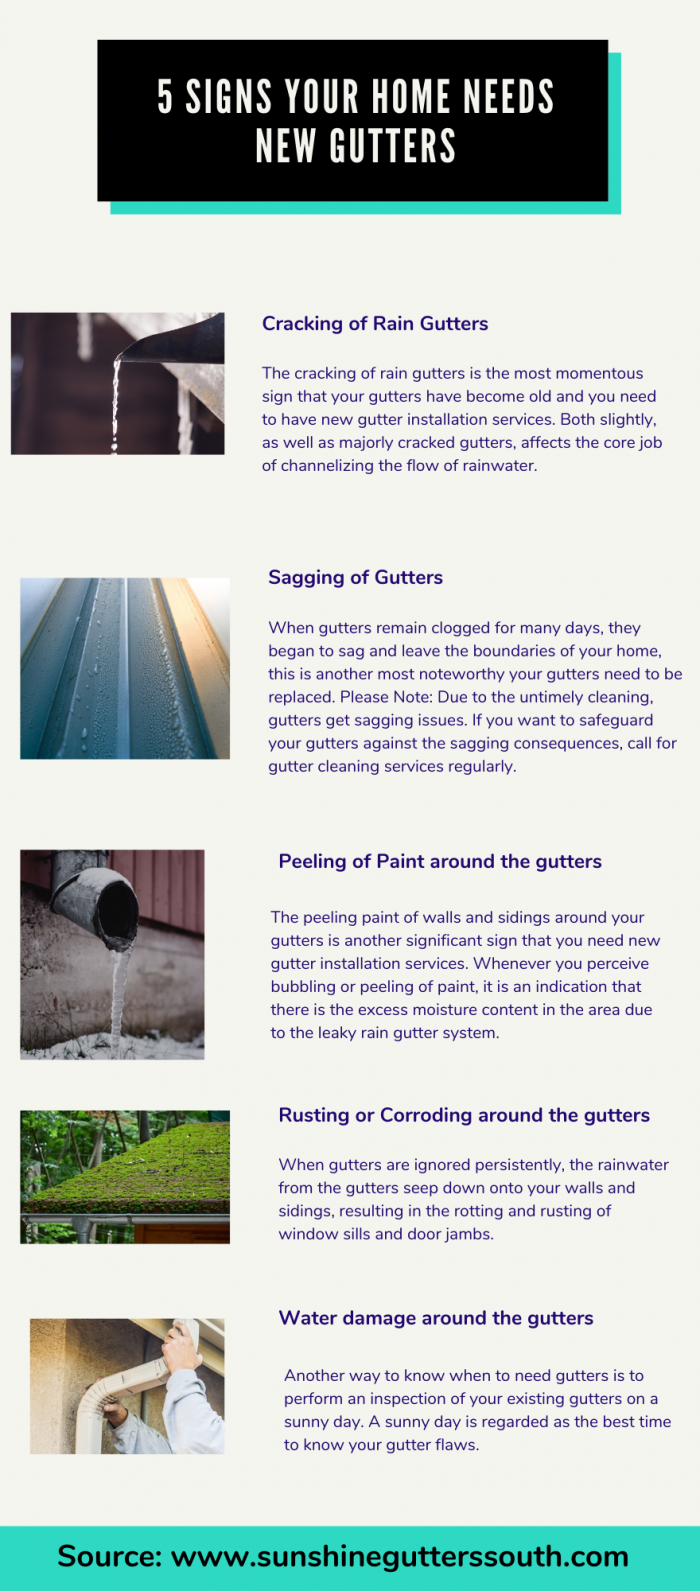 5 Signs Your Home Needs New Gutters